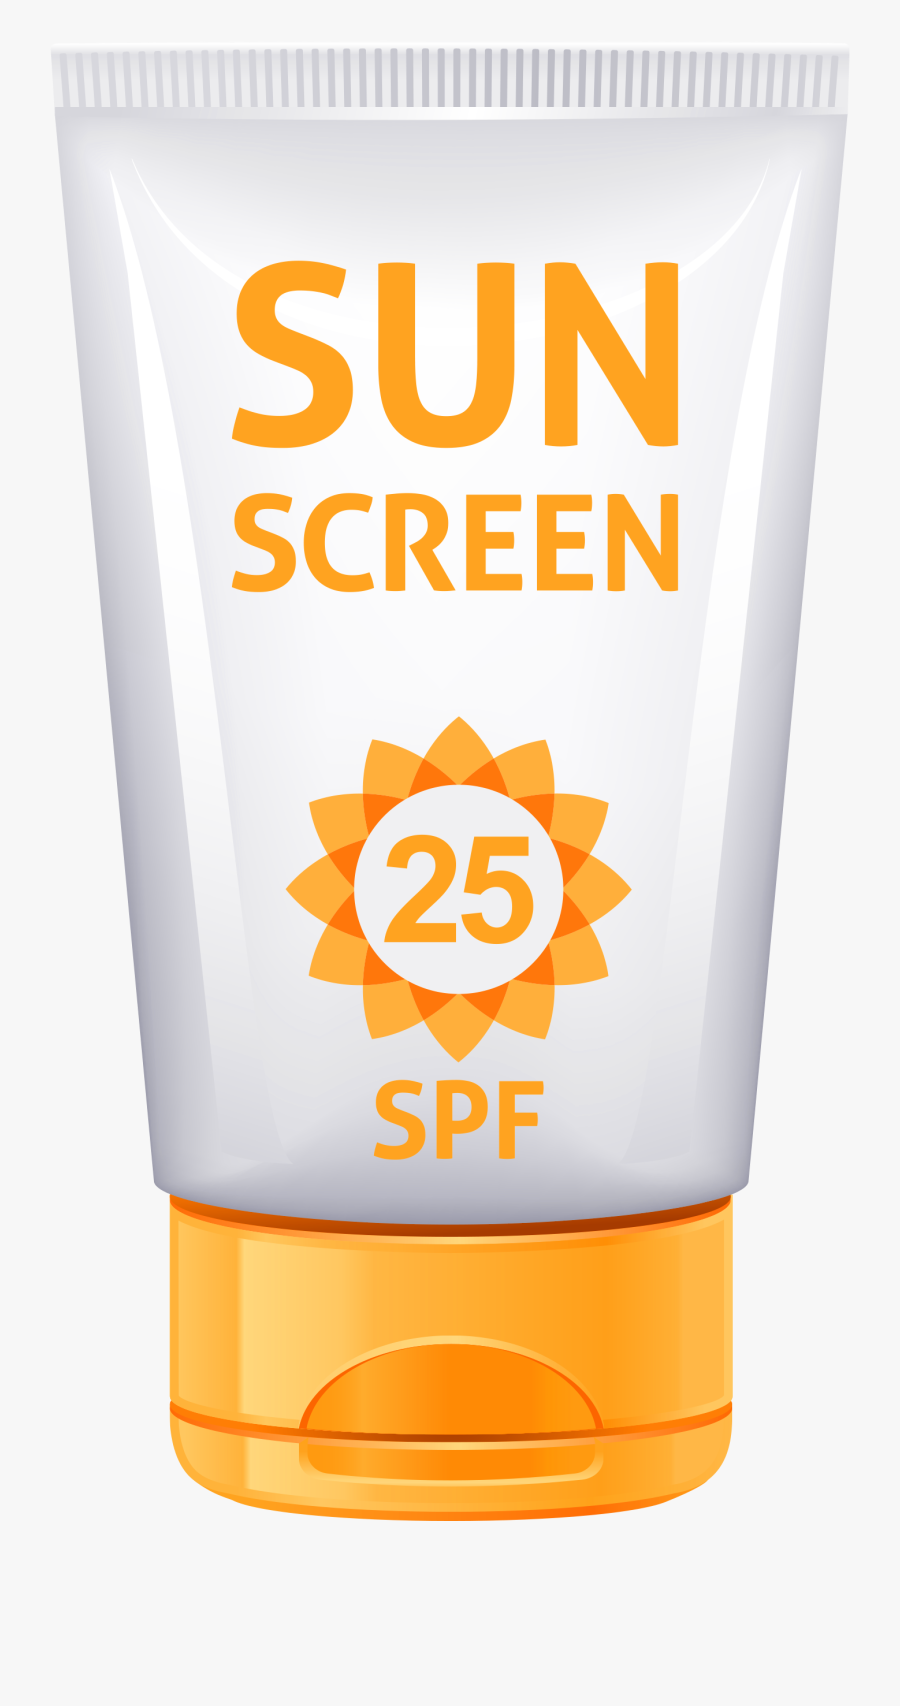 Sunscreen Tube Png Clipart Picture - Transparent Background Sunscreen Clipart, Transparent Clipart